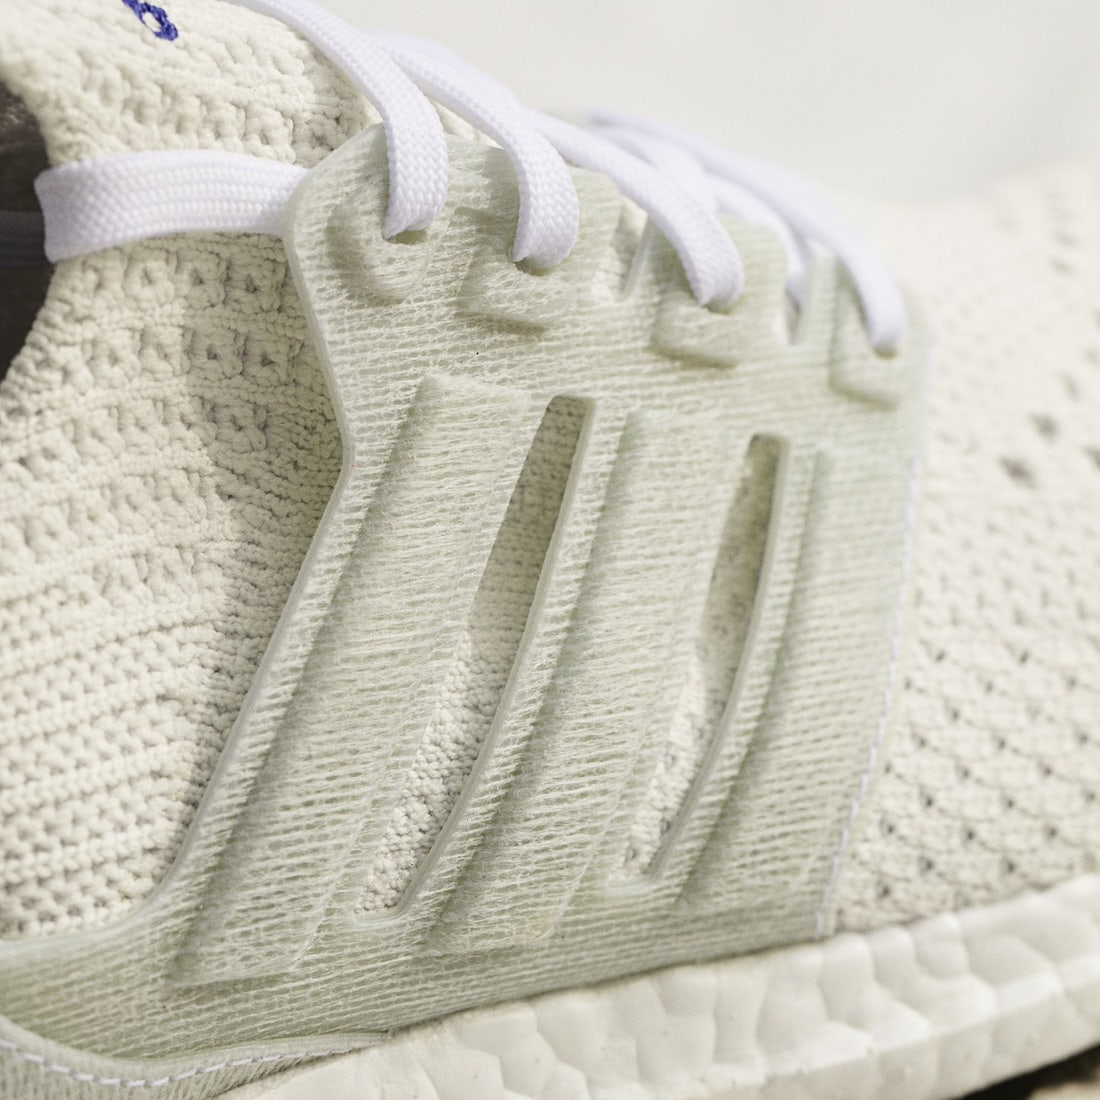 Parley adidas Ultra Boost 6.0 DNA FZ0250 Release Date Info